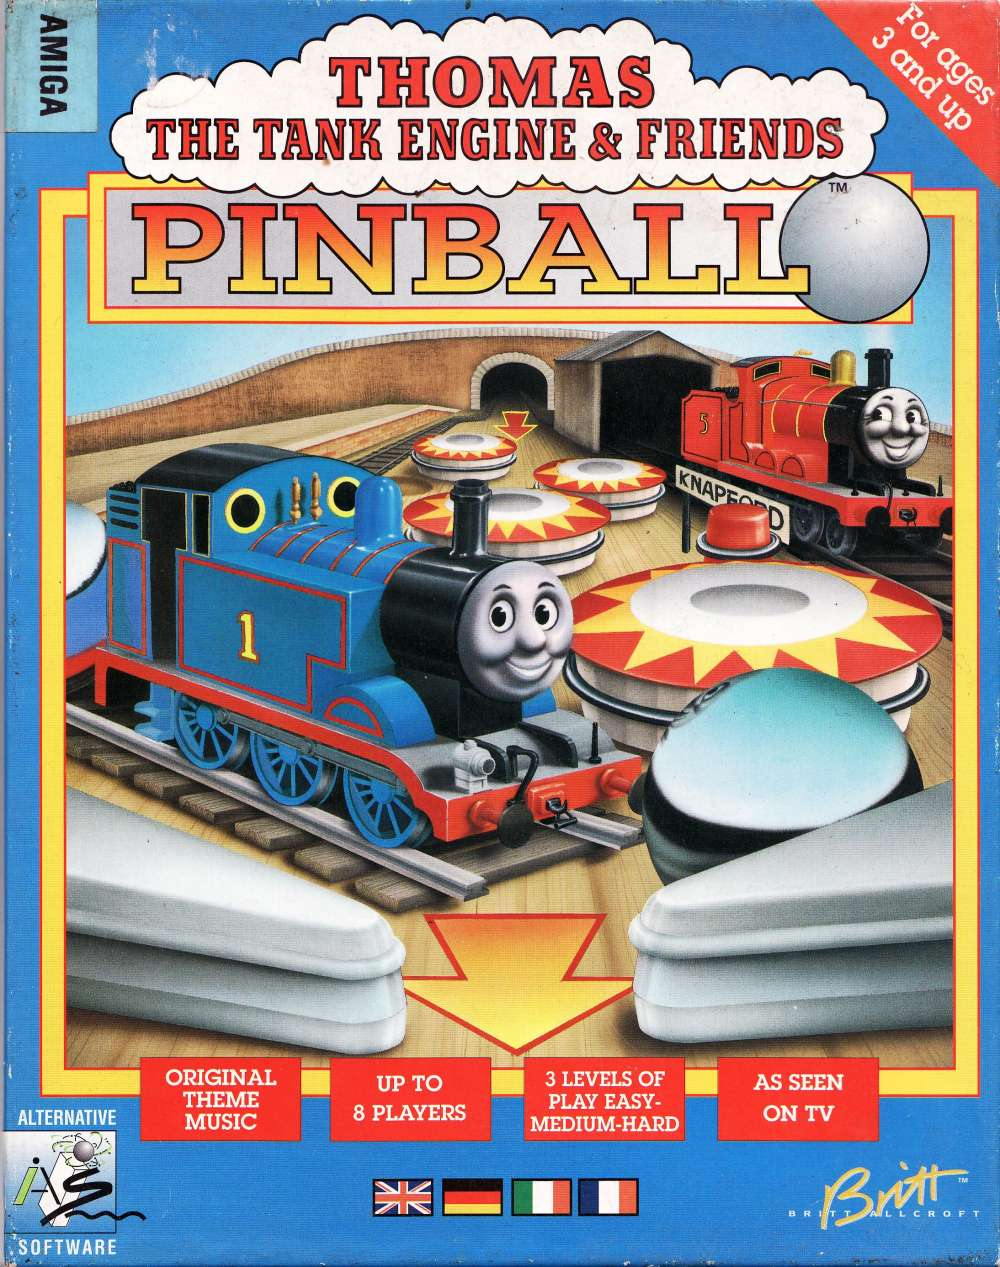 Thomas The Tank Engine And Friends Games Free Online